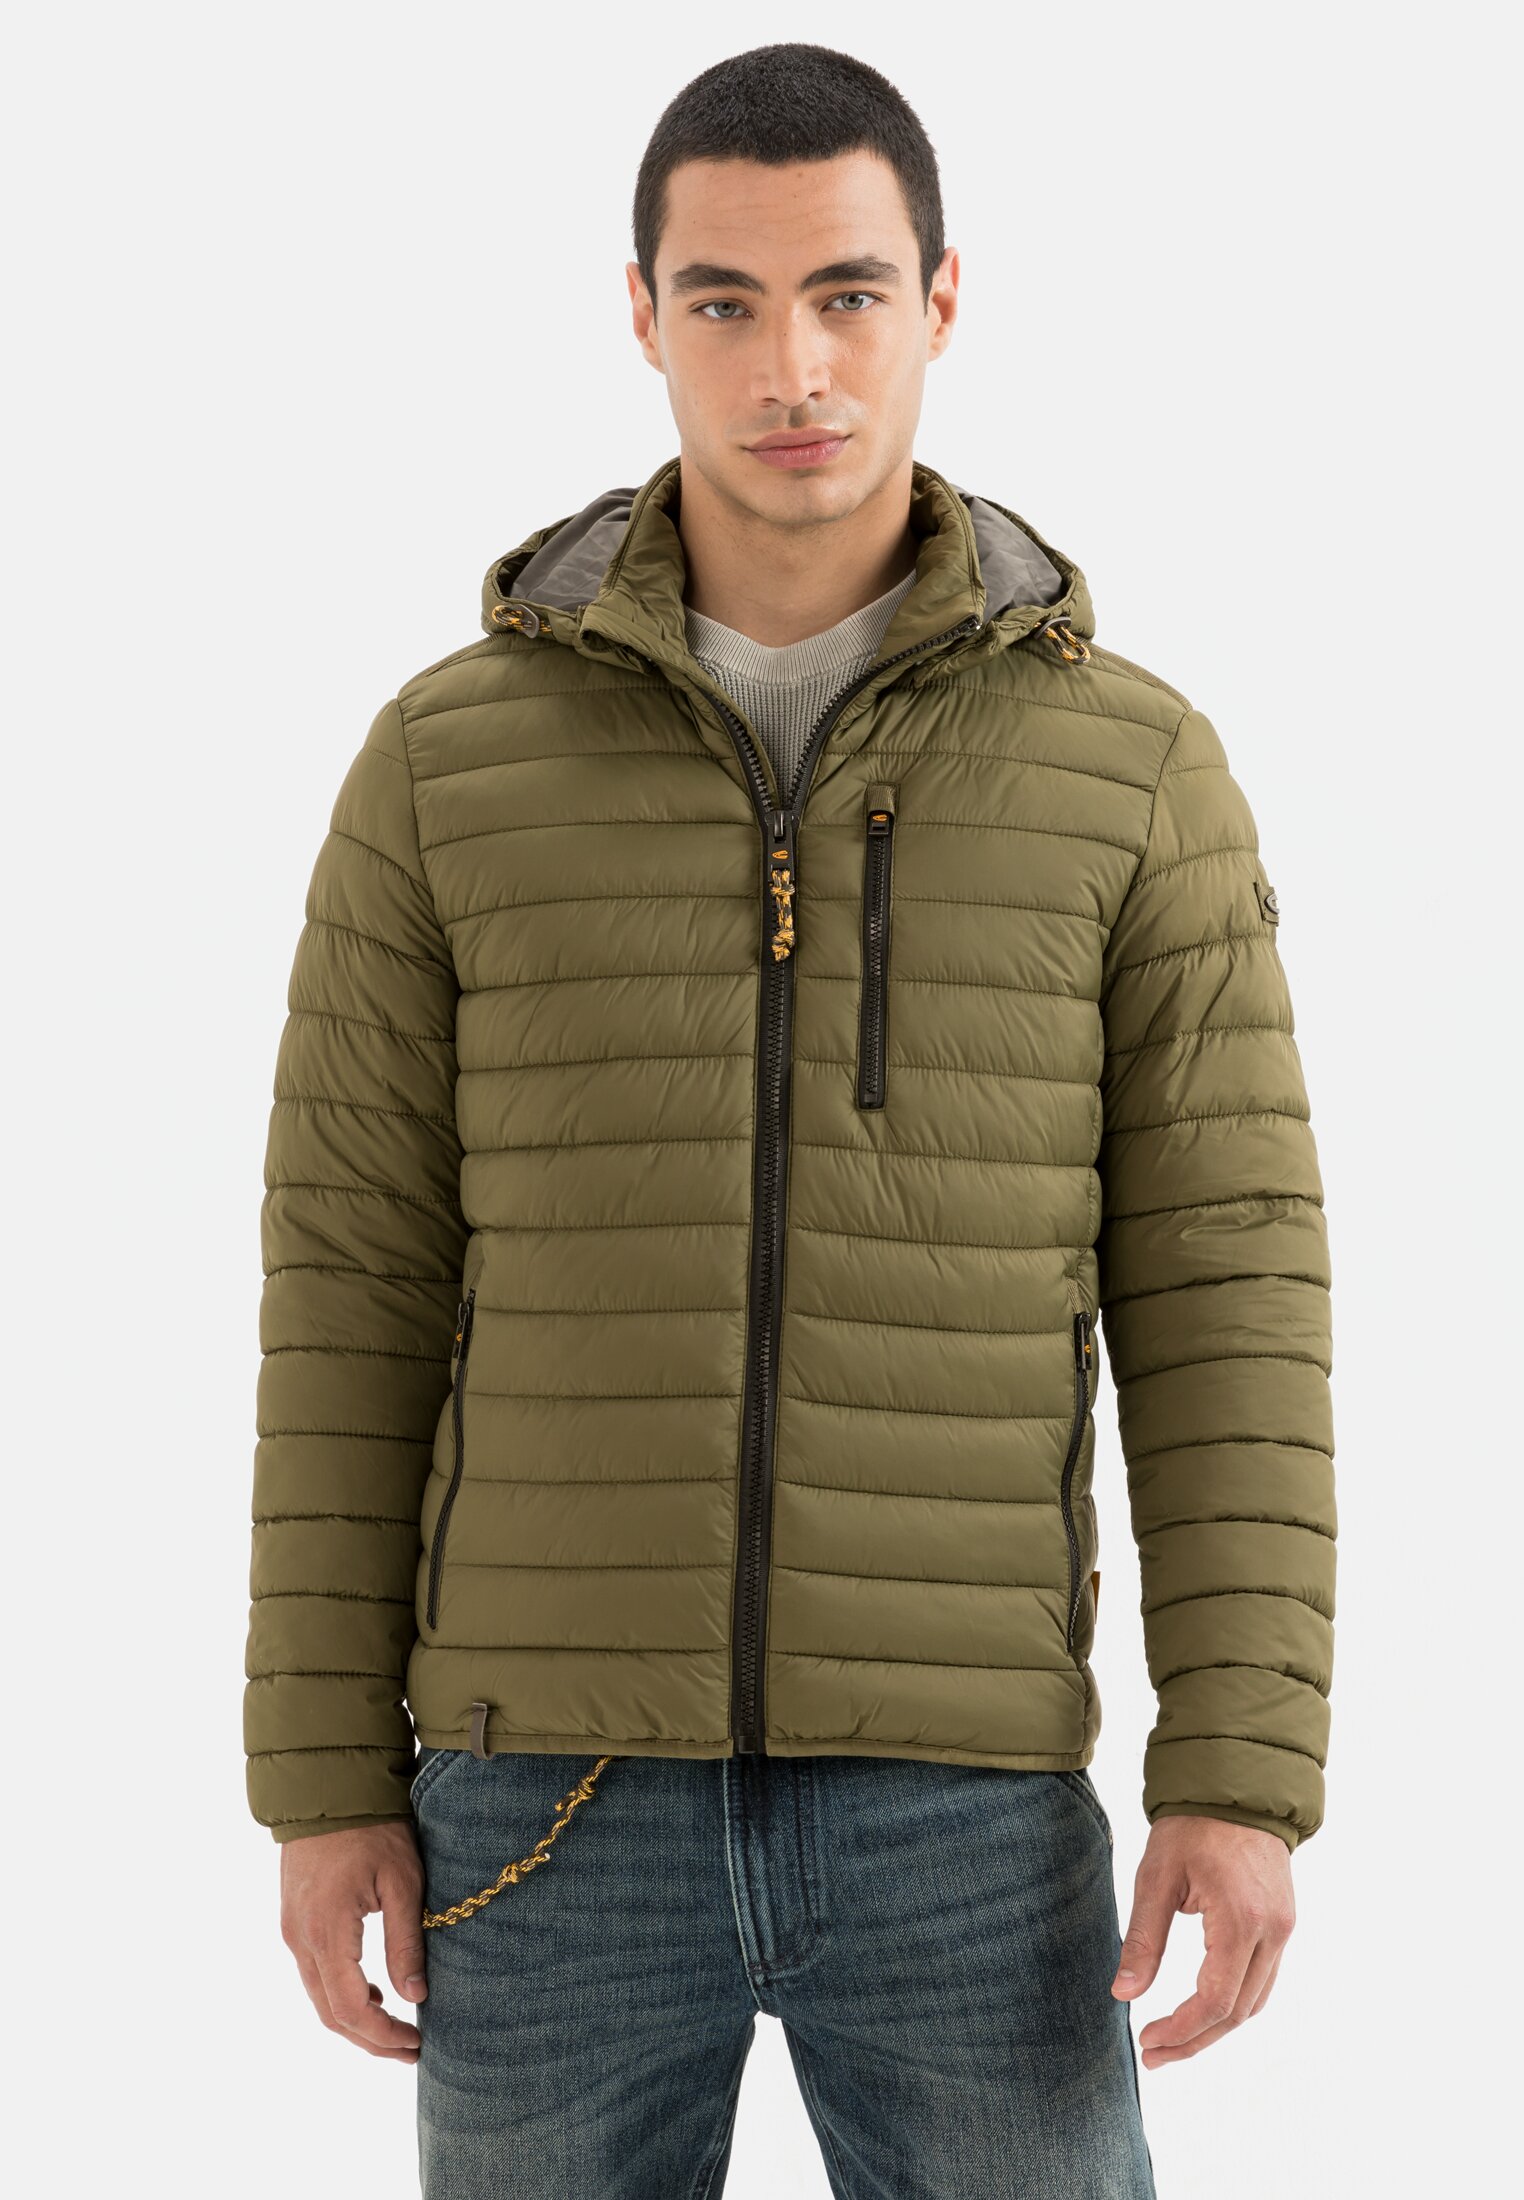 Quilted blouson for | Olive | camel Herren in act 48 Brown